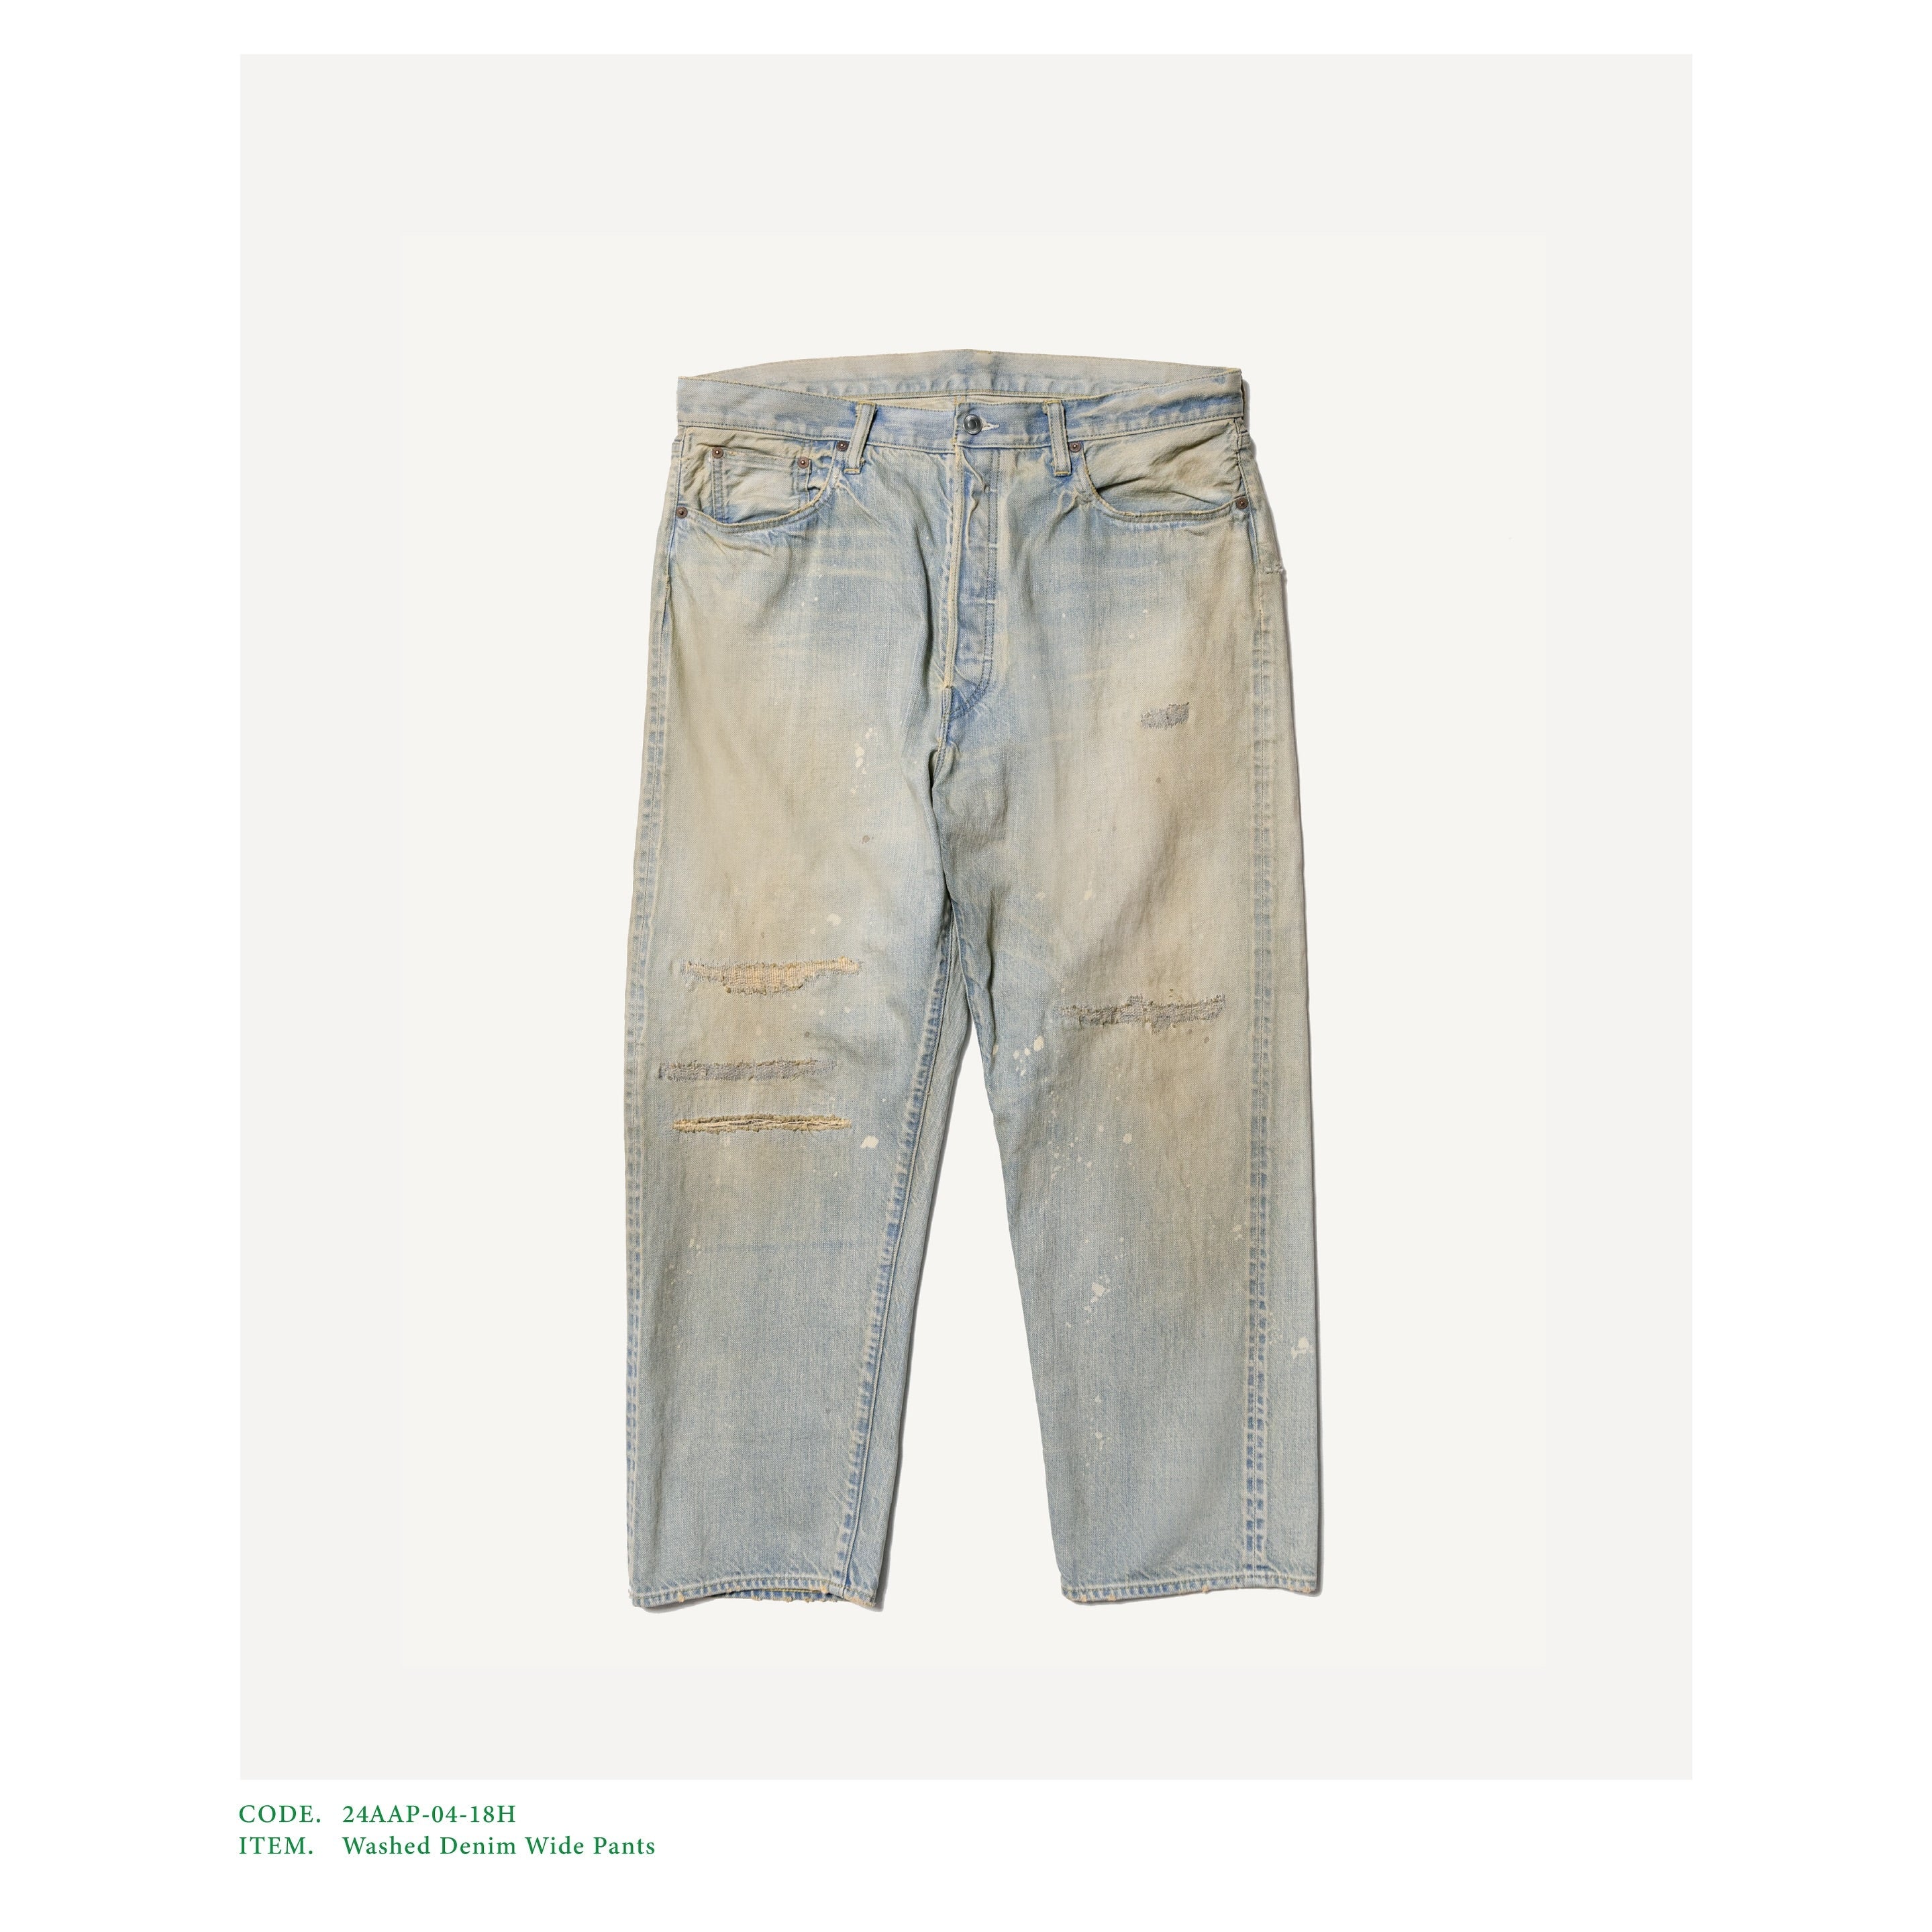 A.PRESSE 24AW Washed Denim Wide Pants